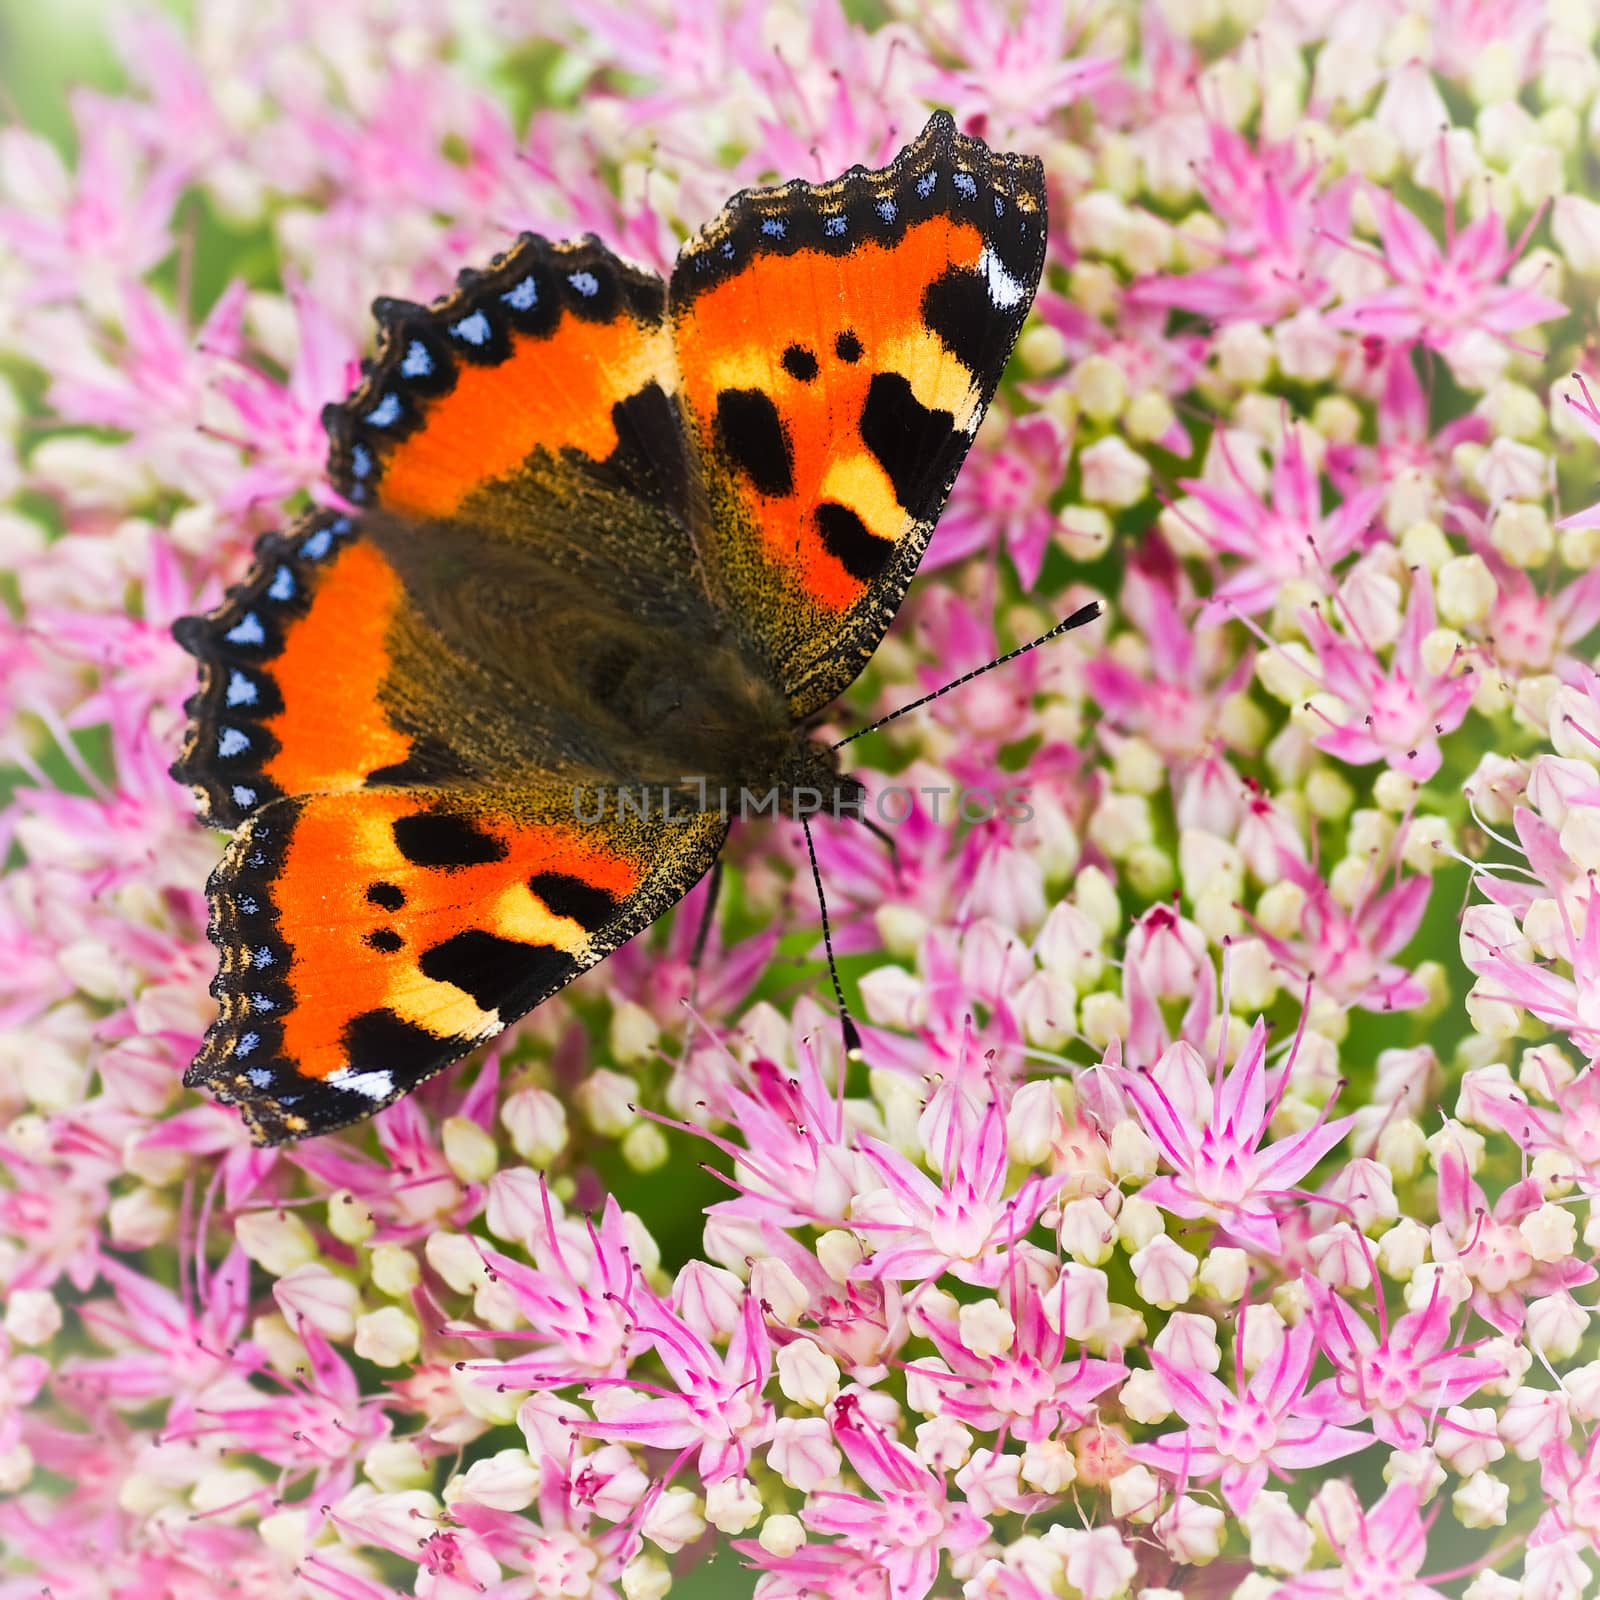 Small tortoiseshell butterfly or Aglais urticae on Sedum flowers in late summer - square